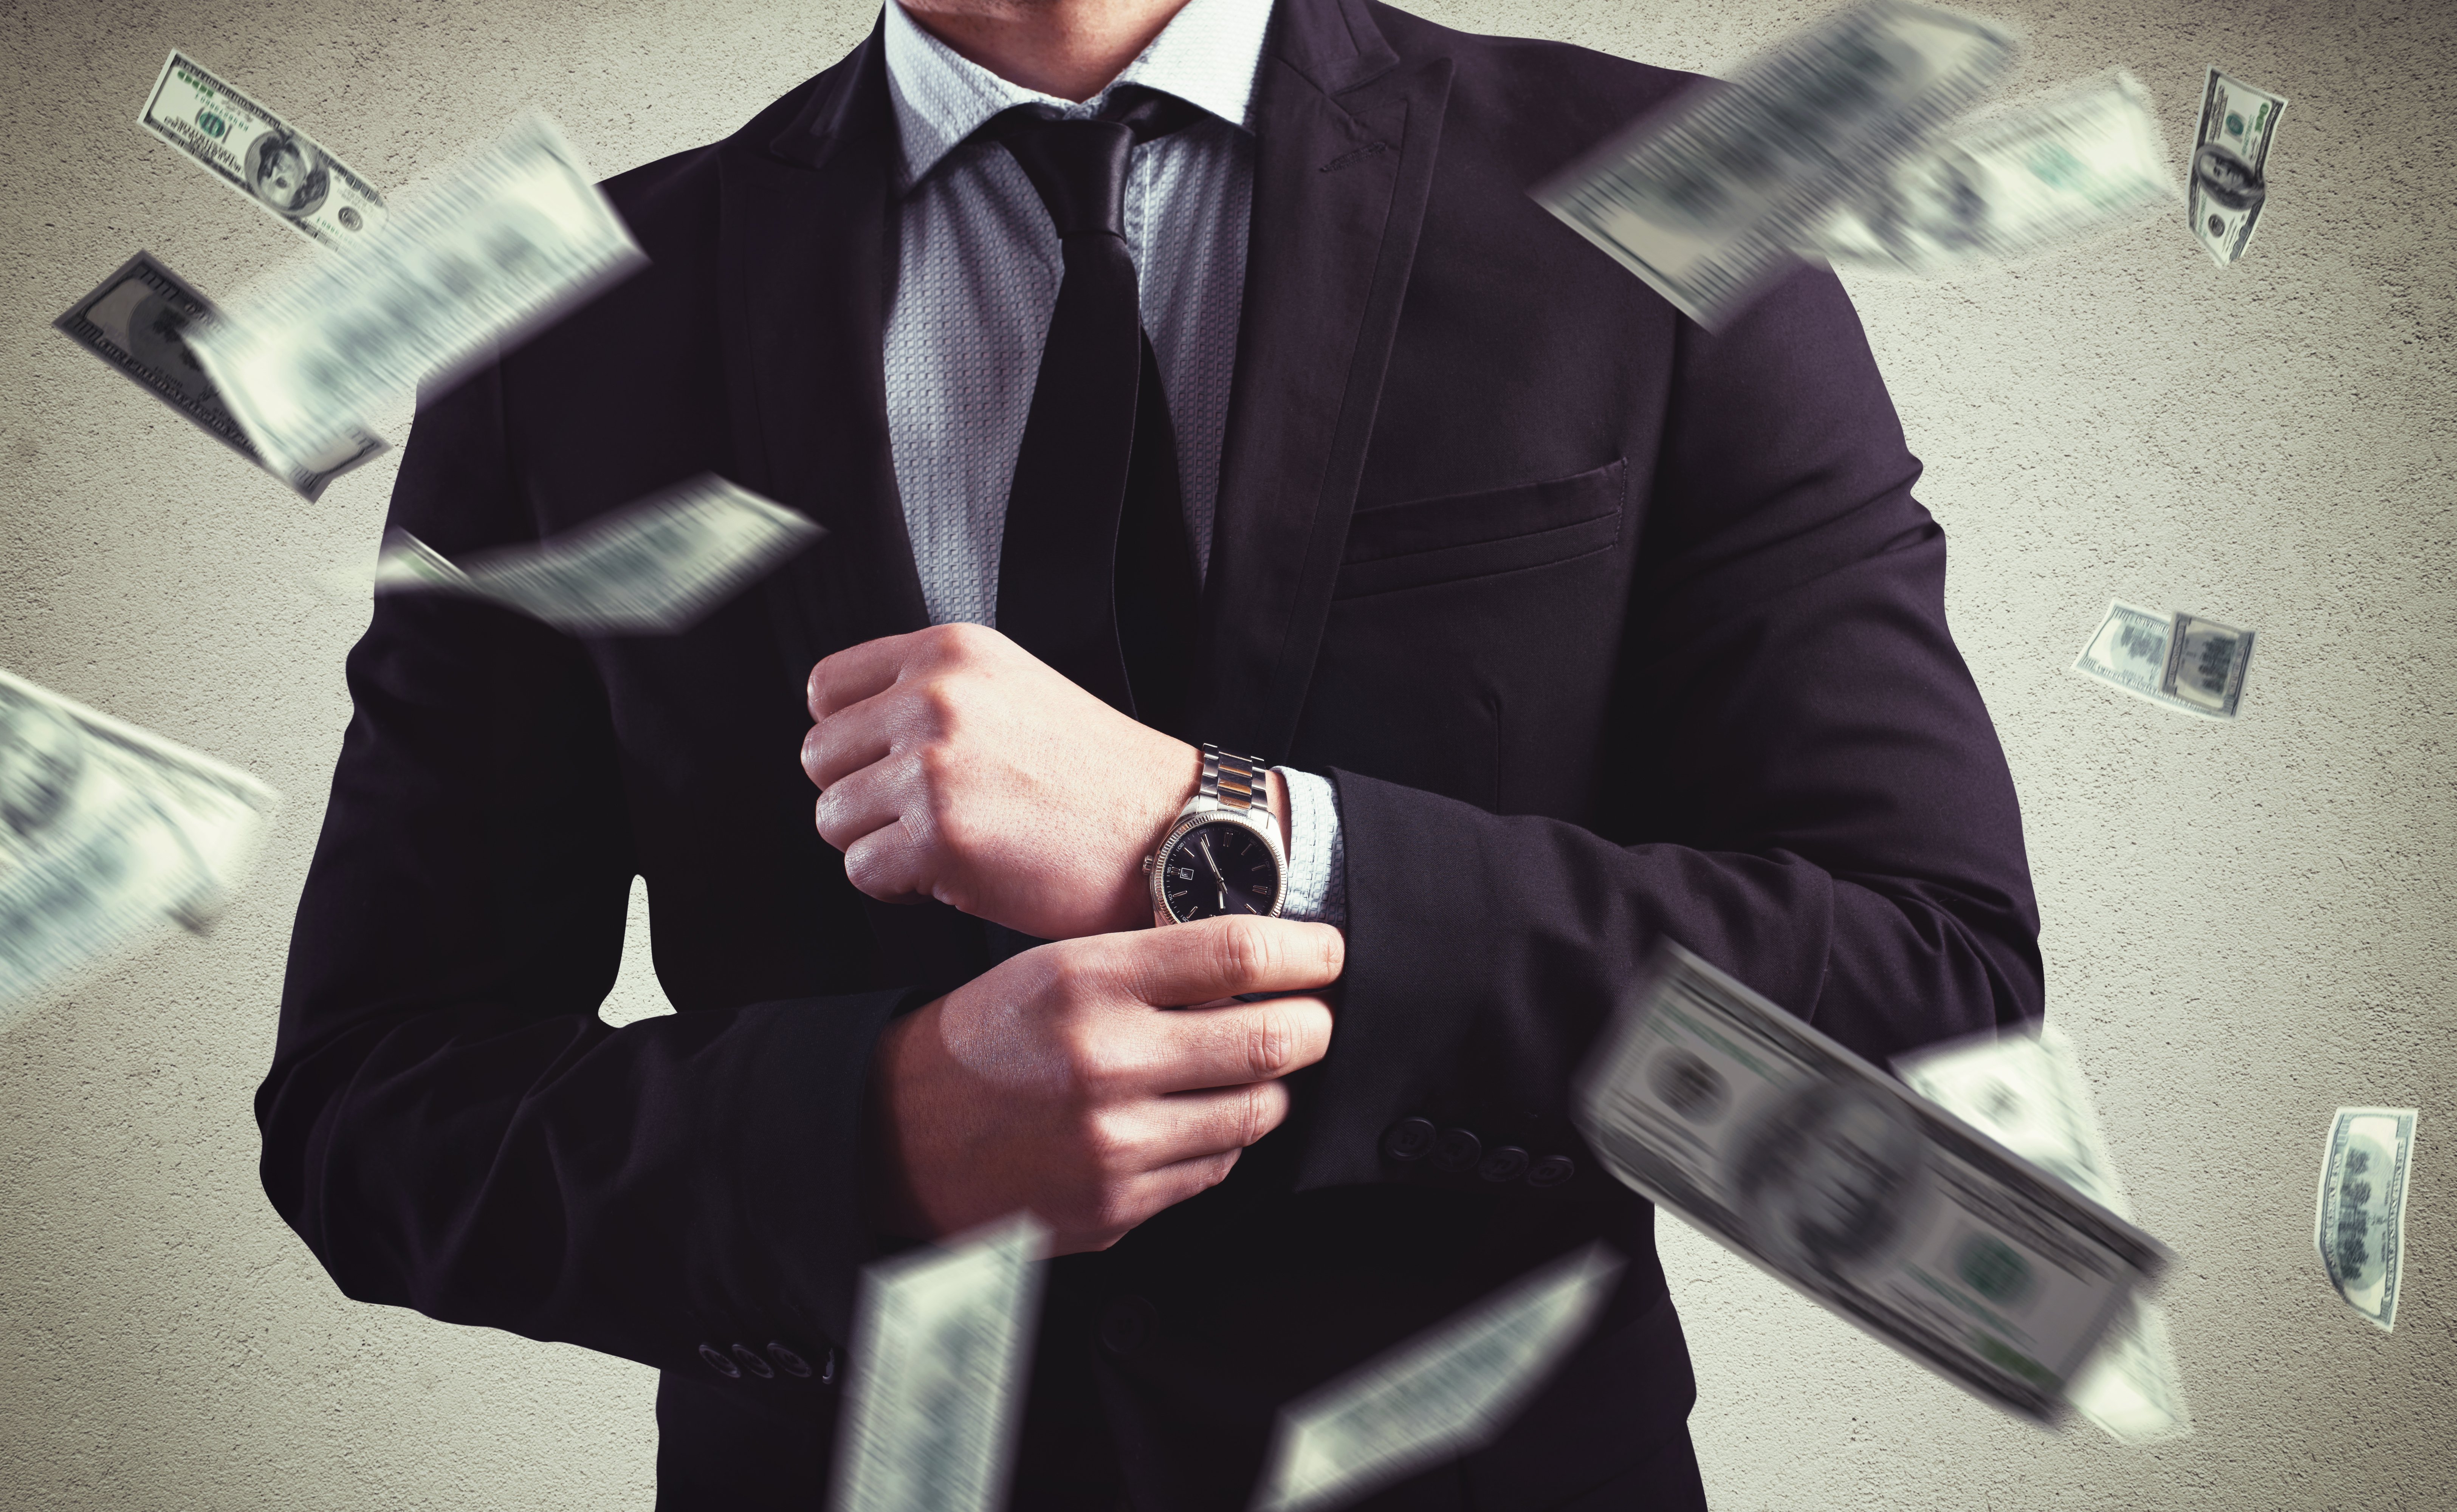 Dollar bills flying around a man who is corporately dressed | Photo: Shutterstock